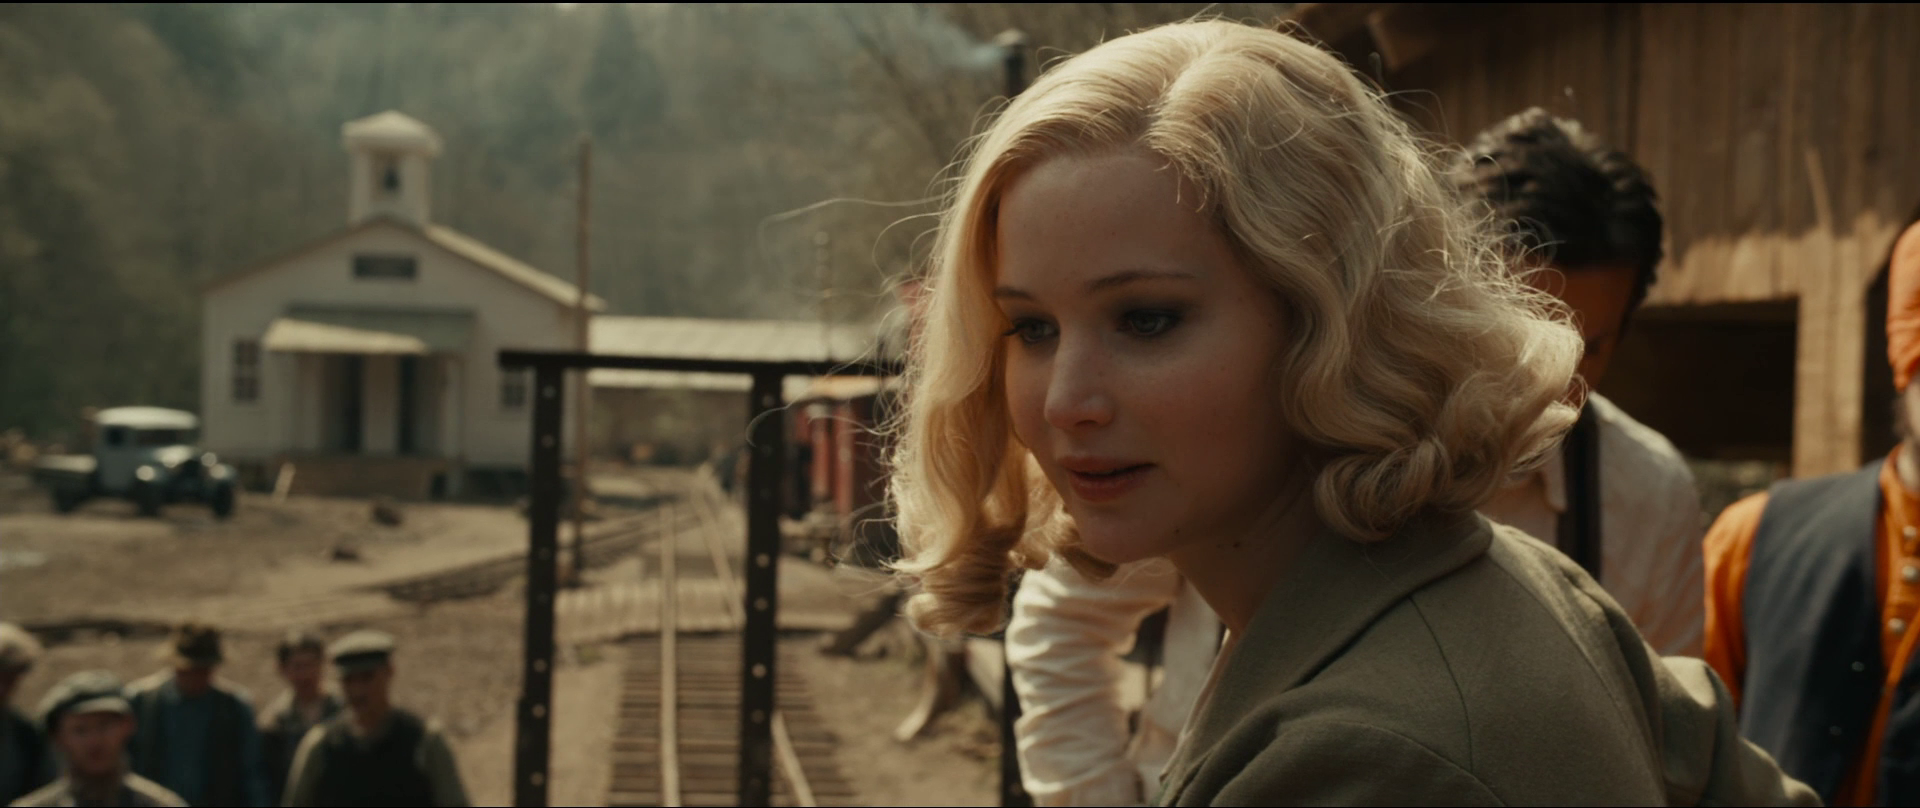  Serena.2014.LIMITED.1080p.BluRay.X264-AMIABLE 7.65GB-5.png